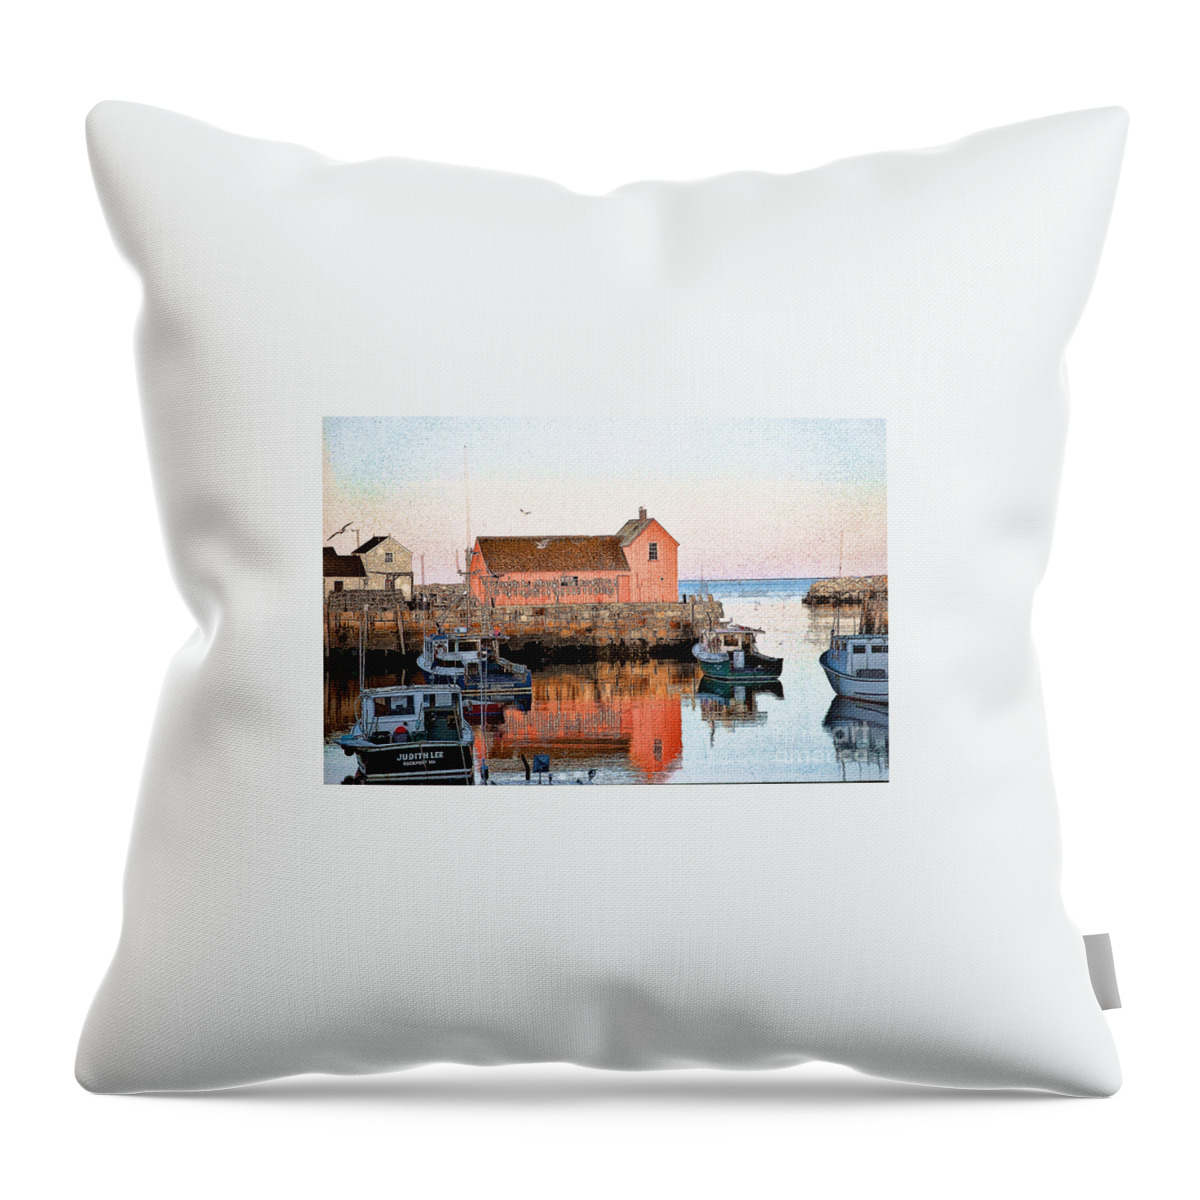 Rockport Throw Pillow featuring the photograph Rockport 1 by Edward Sobuta